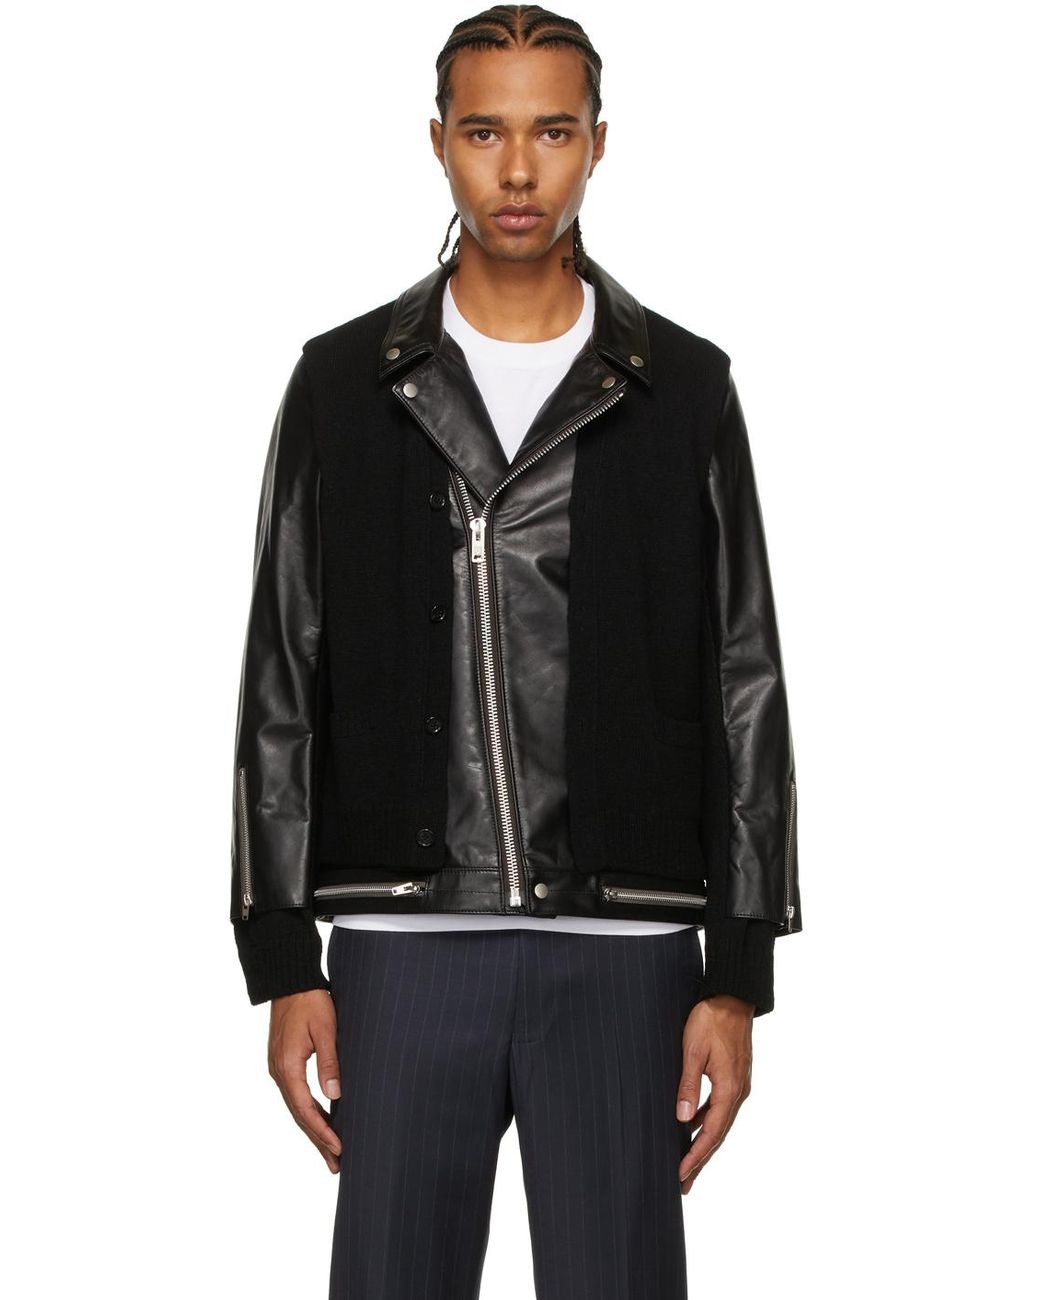 Undercover Wool & Leather Jacket in Black for Men | Lyst